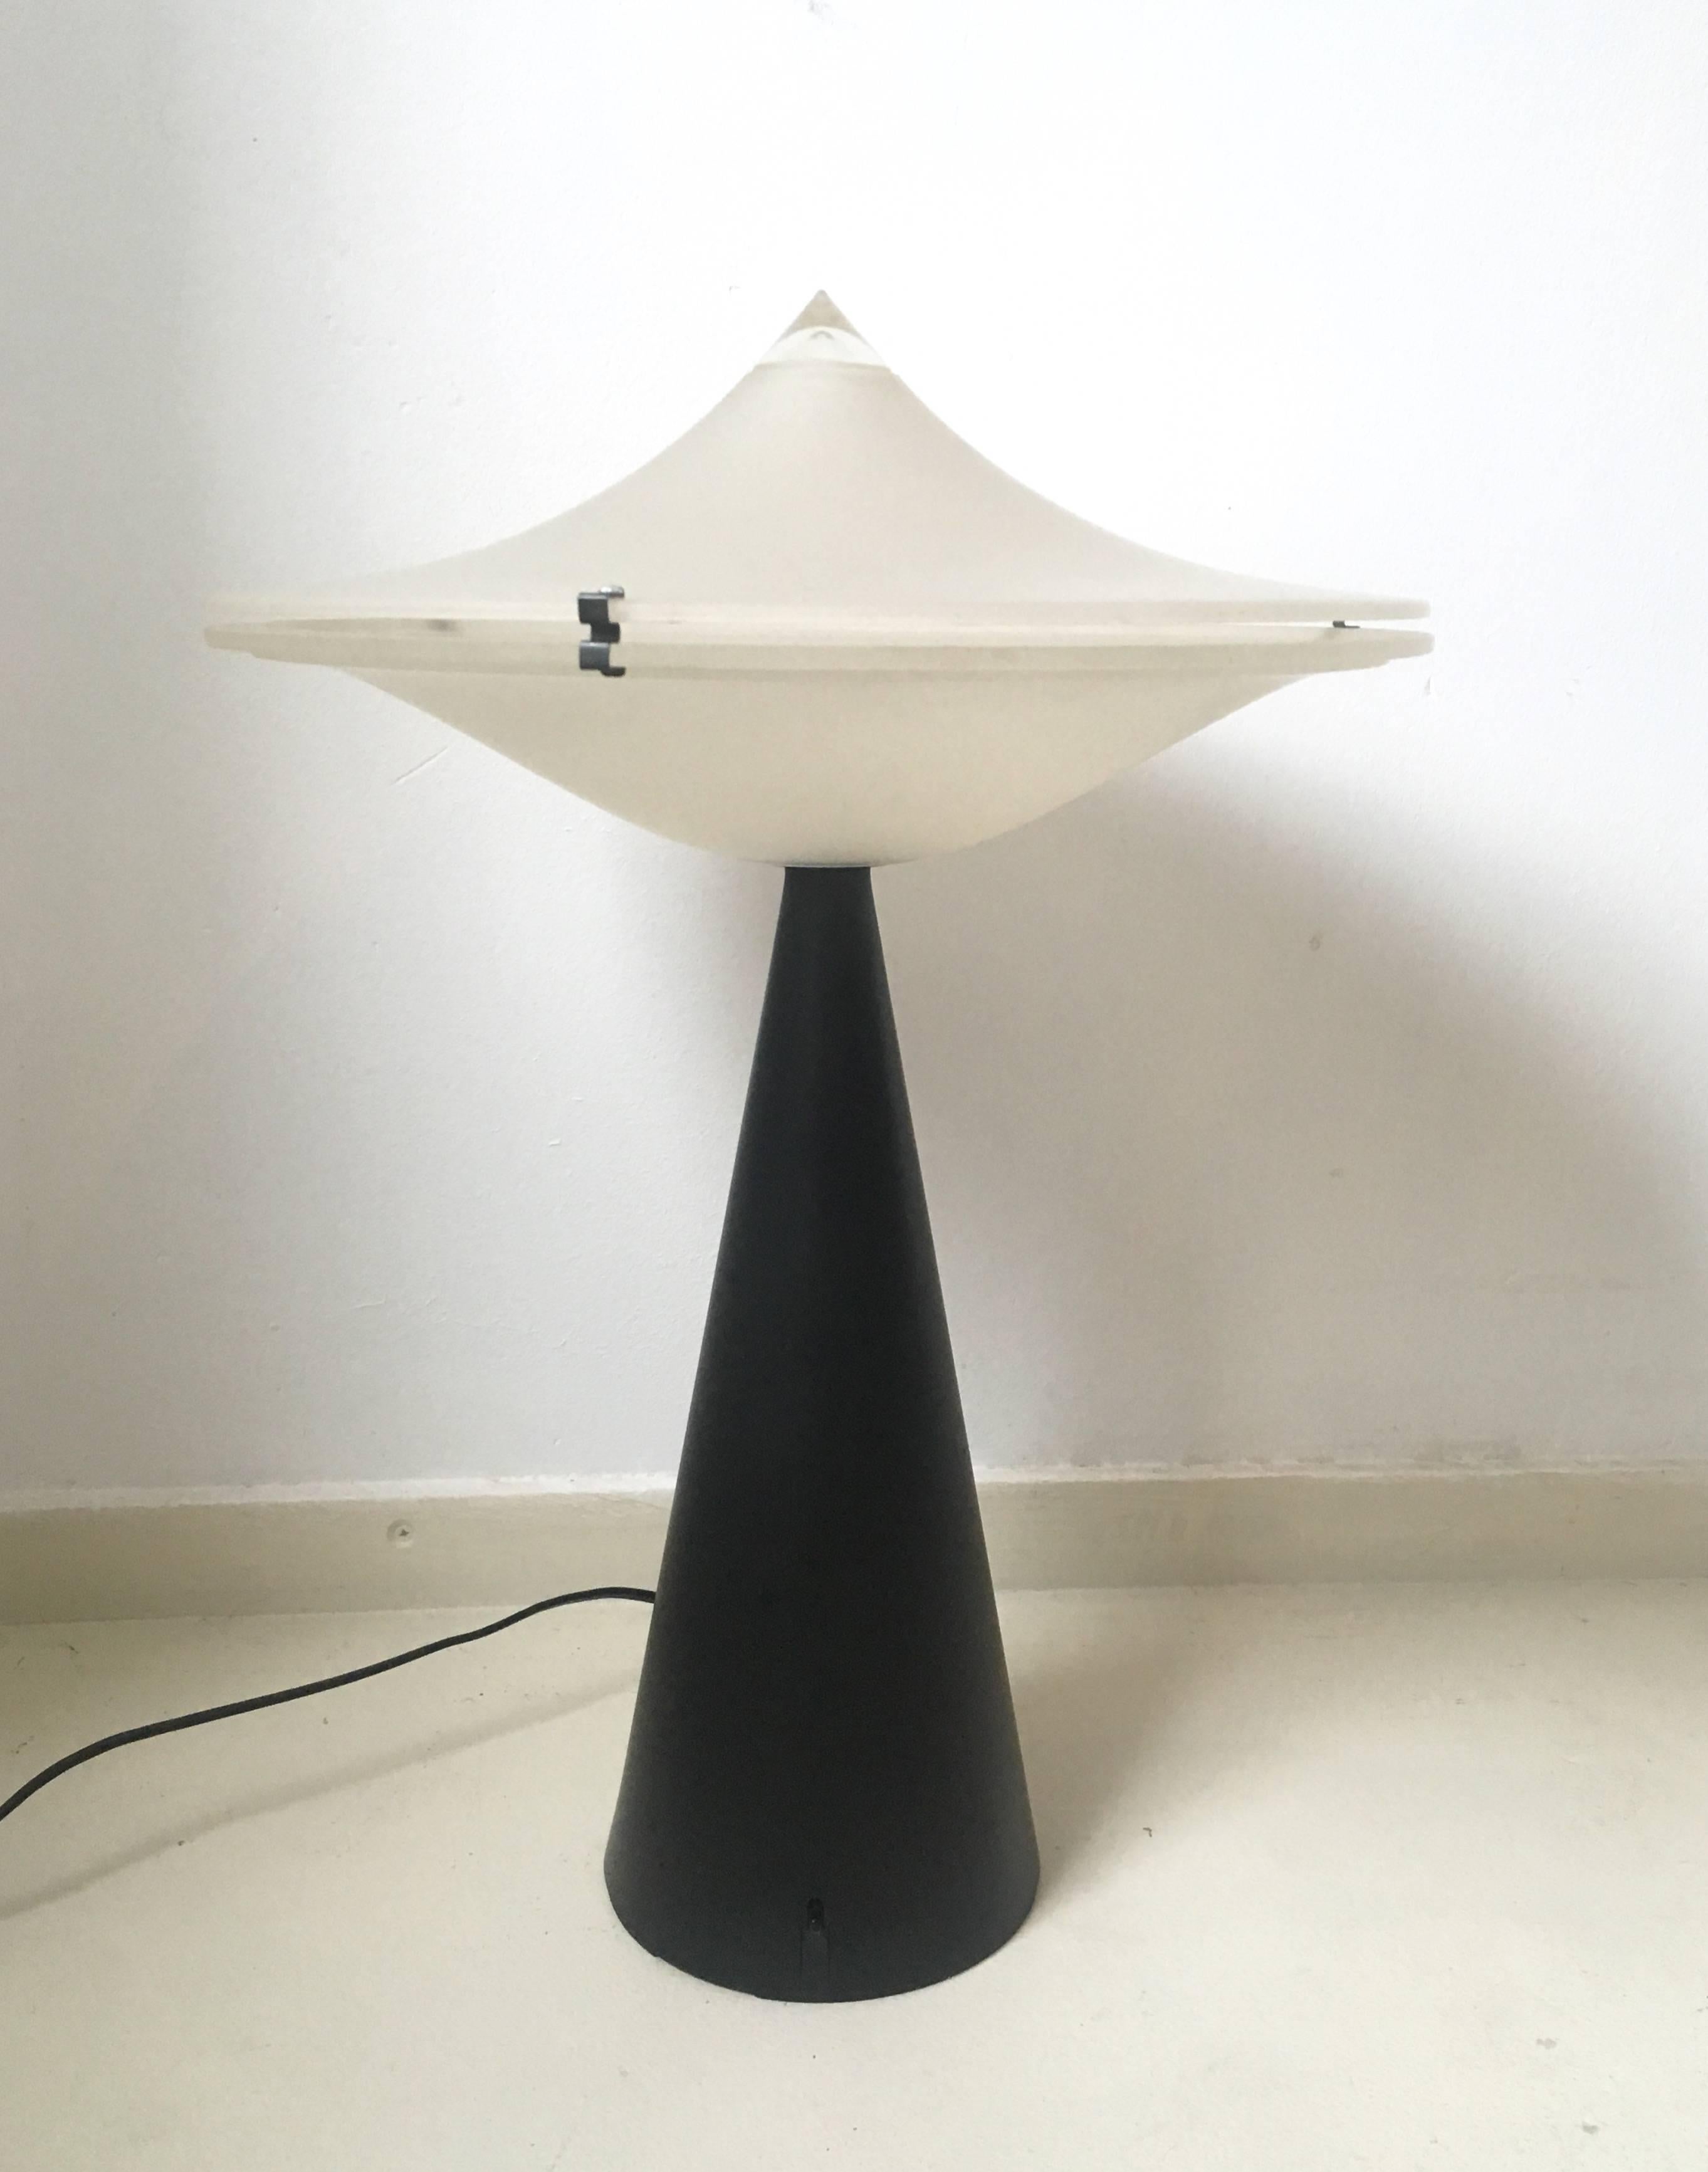 This wonderful Italian design was called 'Alien' and resembles a U.F.O. It was manufactured, circa 1975. (Space Age era).
The lamp consists of two satin glass shades attached by metal clips. A black lacquered foot is provided with a switch that